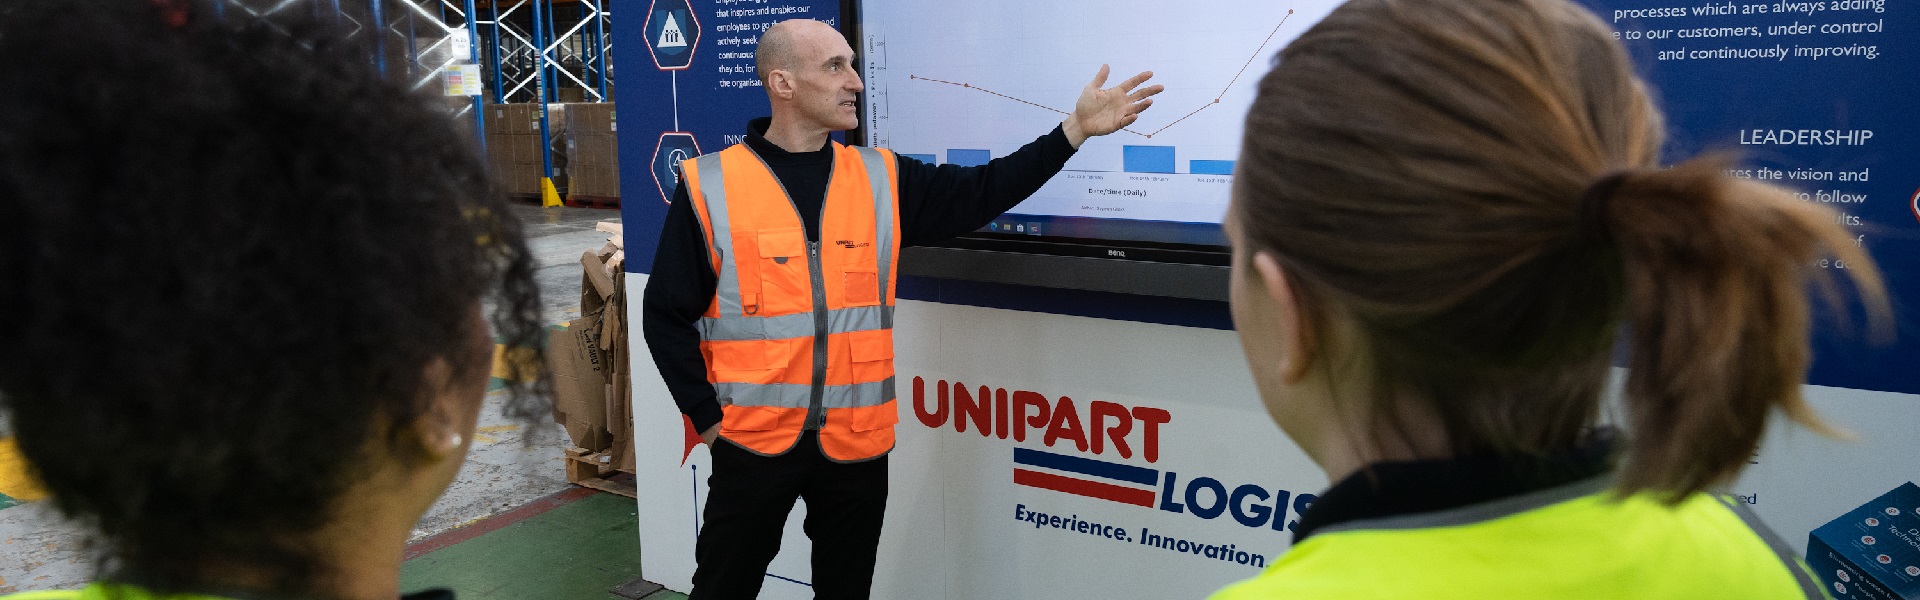 Unipart Group Deepens Partnership With SAP To Accelerate Evolution And Expansion Of IT Services Expertise